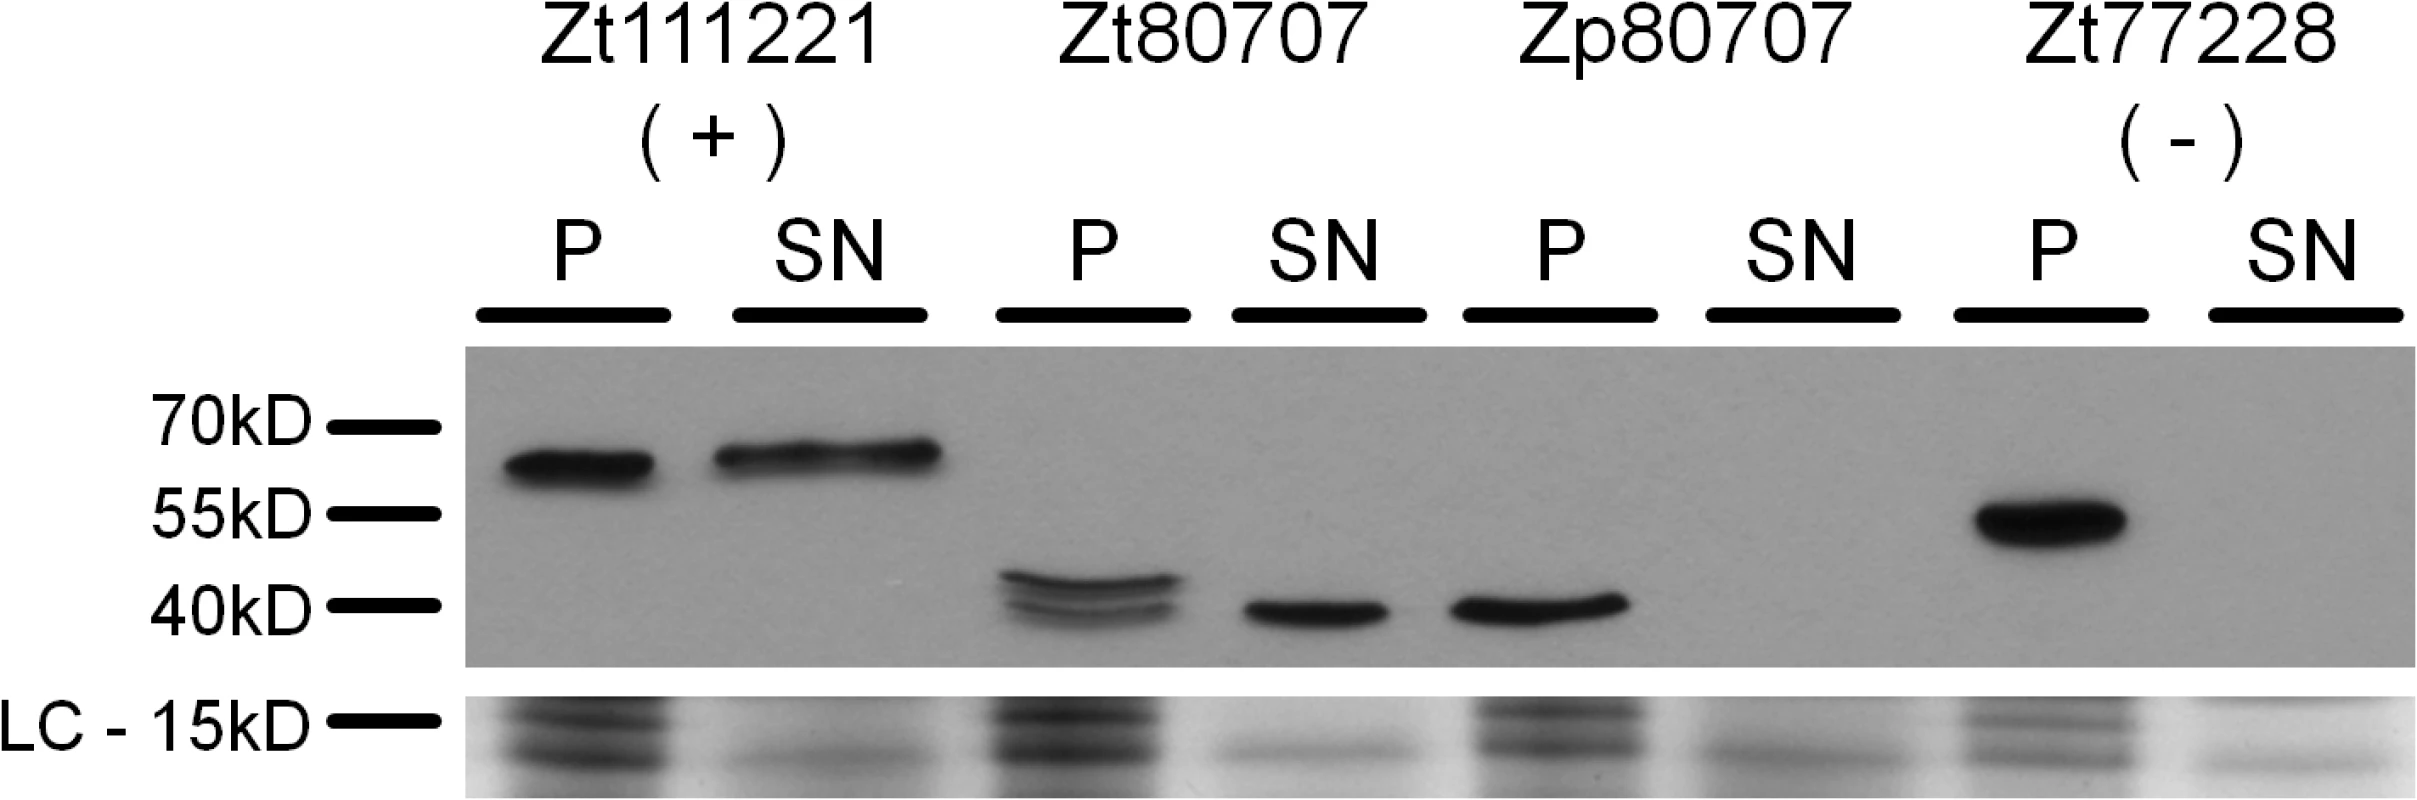 <i>Zt80707</i> encodes a signal peptide targeting the protein for cell secretion in <i>Z</i>. <i>tritici</i>.